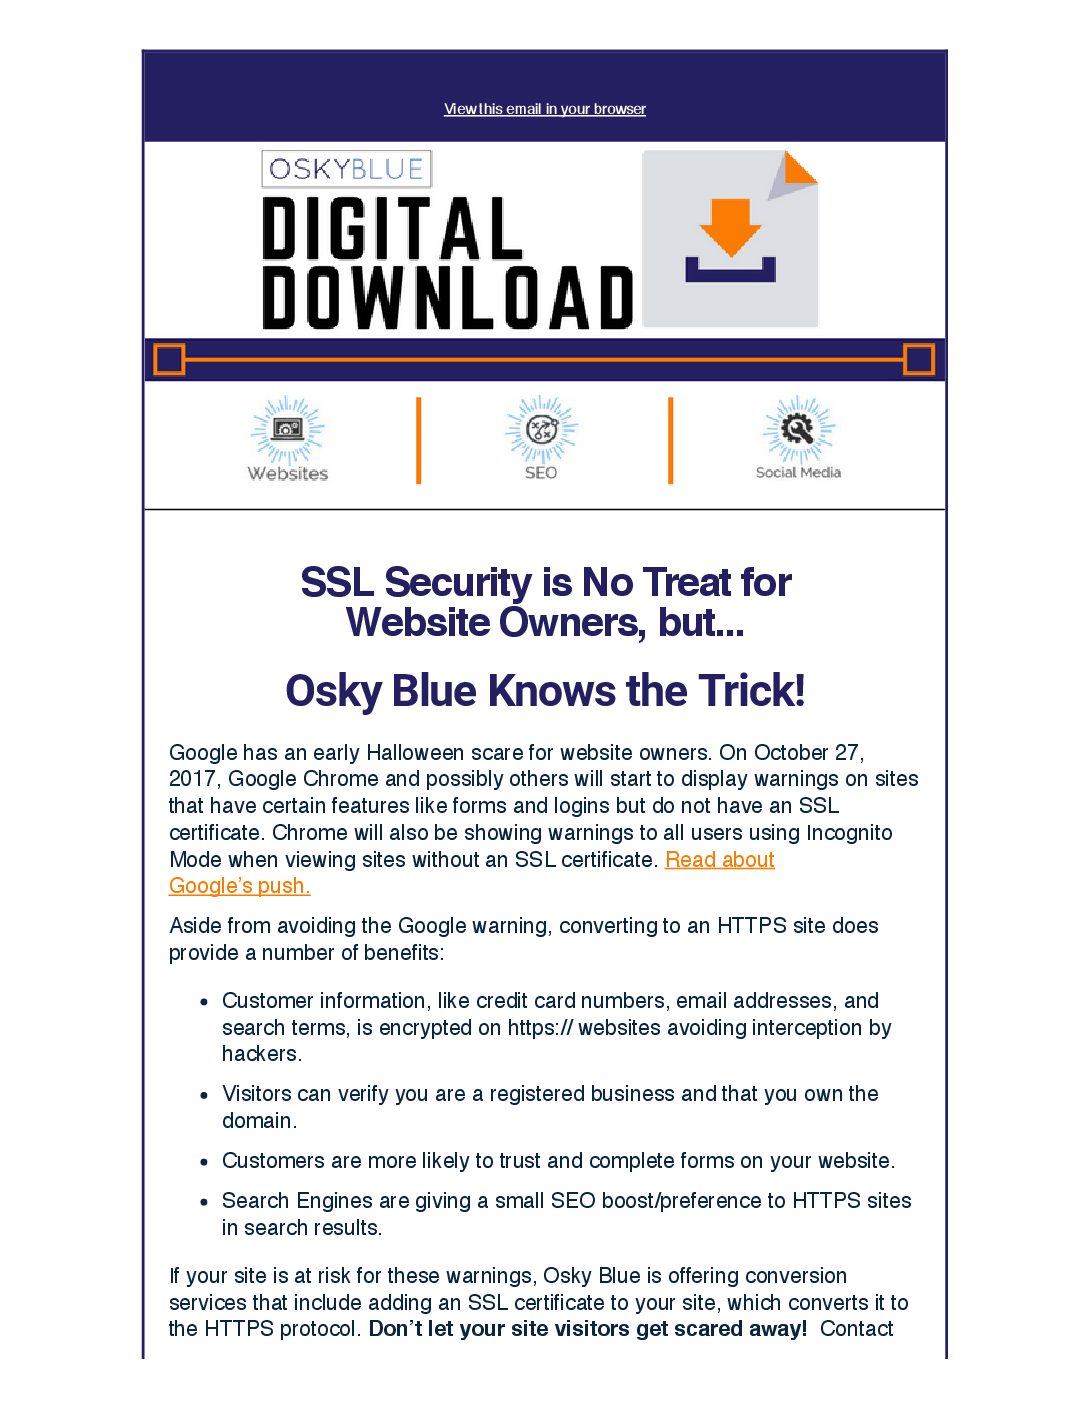 Osky Blue’s Digital Download – Google Pushing HTTPS Security By End of October